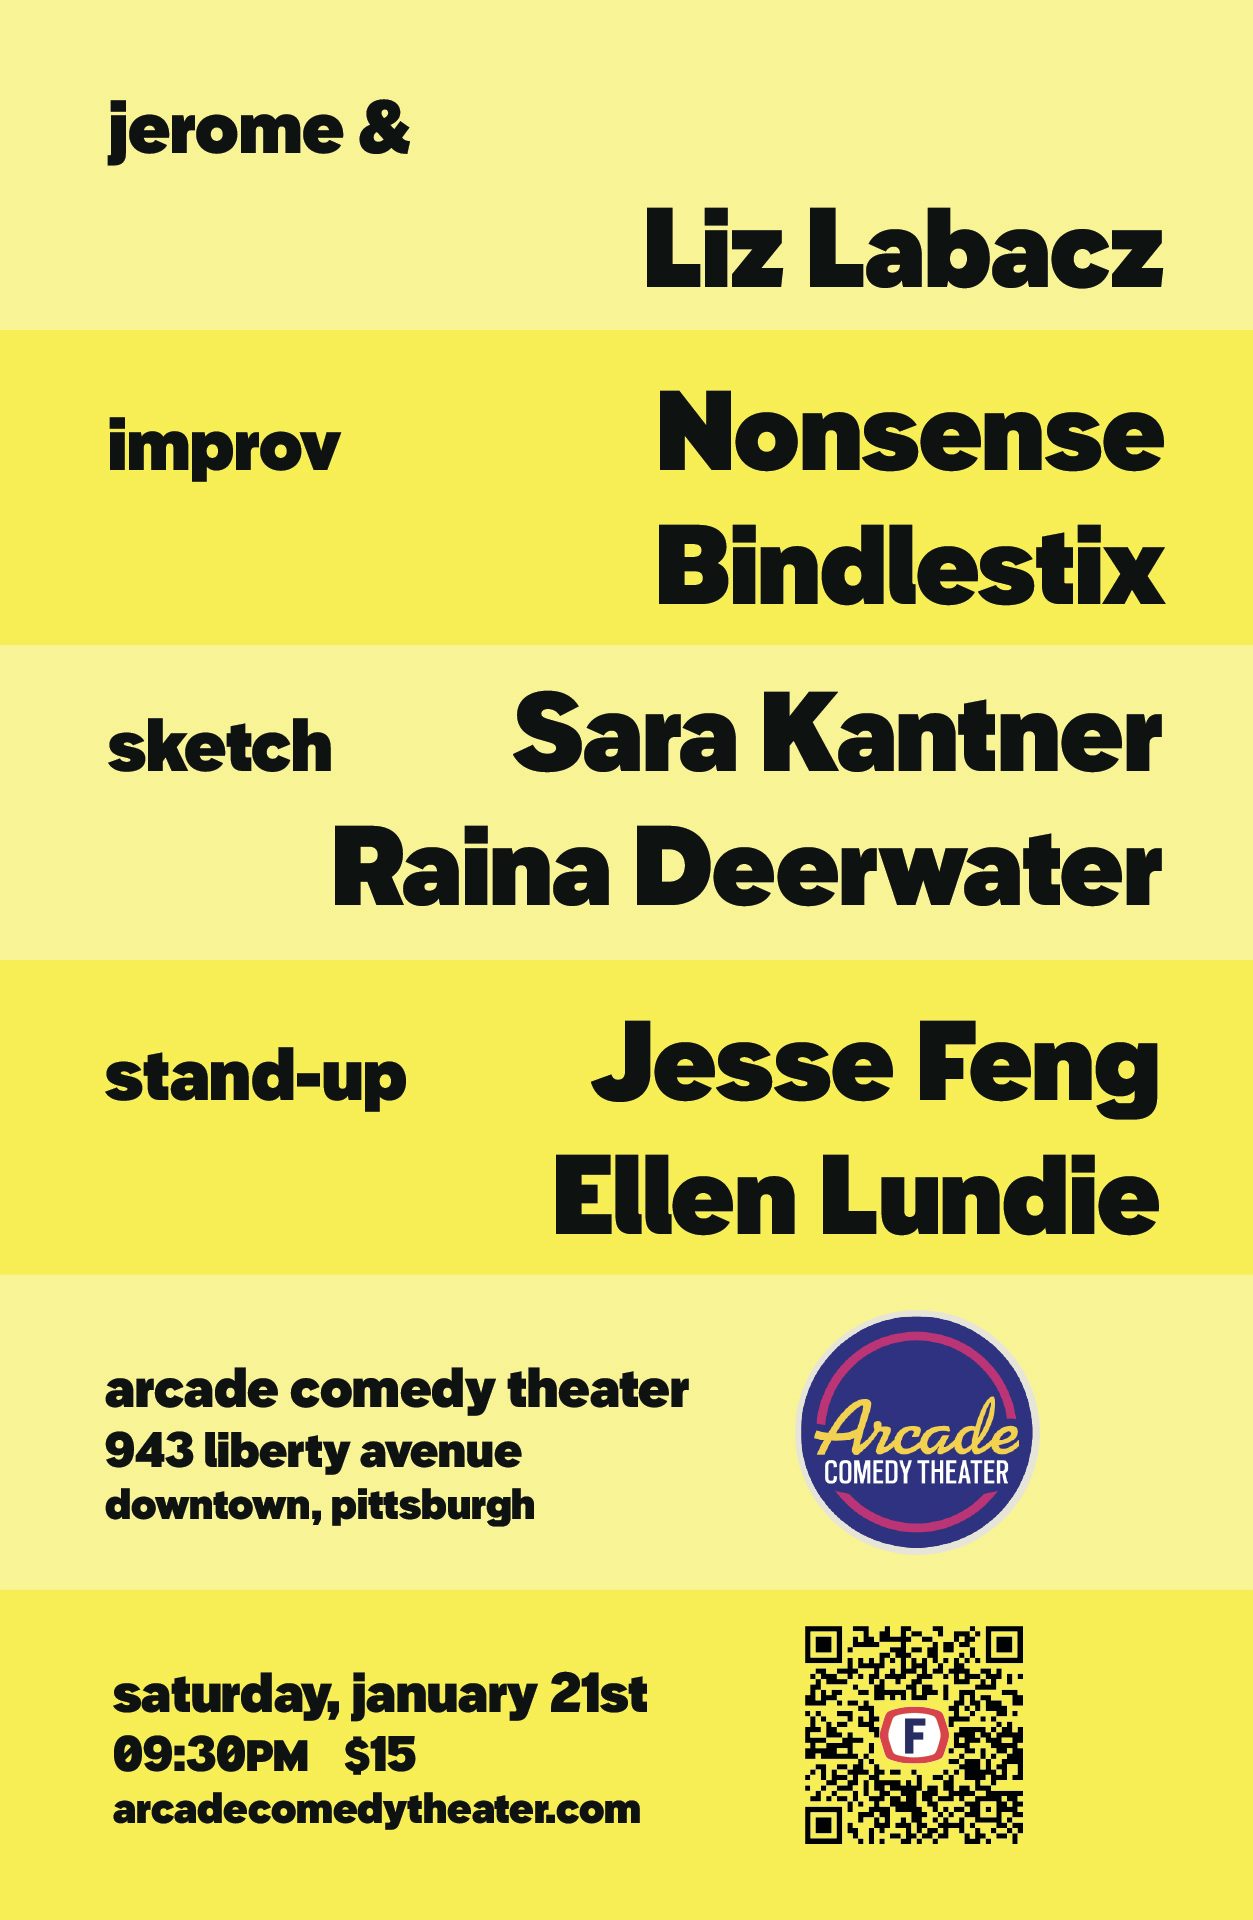 Show poster for Jerome &. It is divided into sections with alternating shades of yellow (subdued and bright), with larger black text sharing the details of the guest, improv, sketch, and stand-up teams. It is very text based via a grid to give space and breathing room to each act.